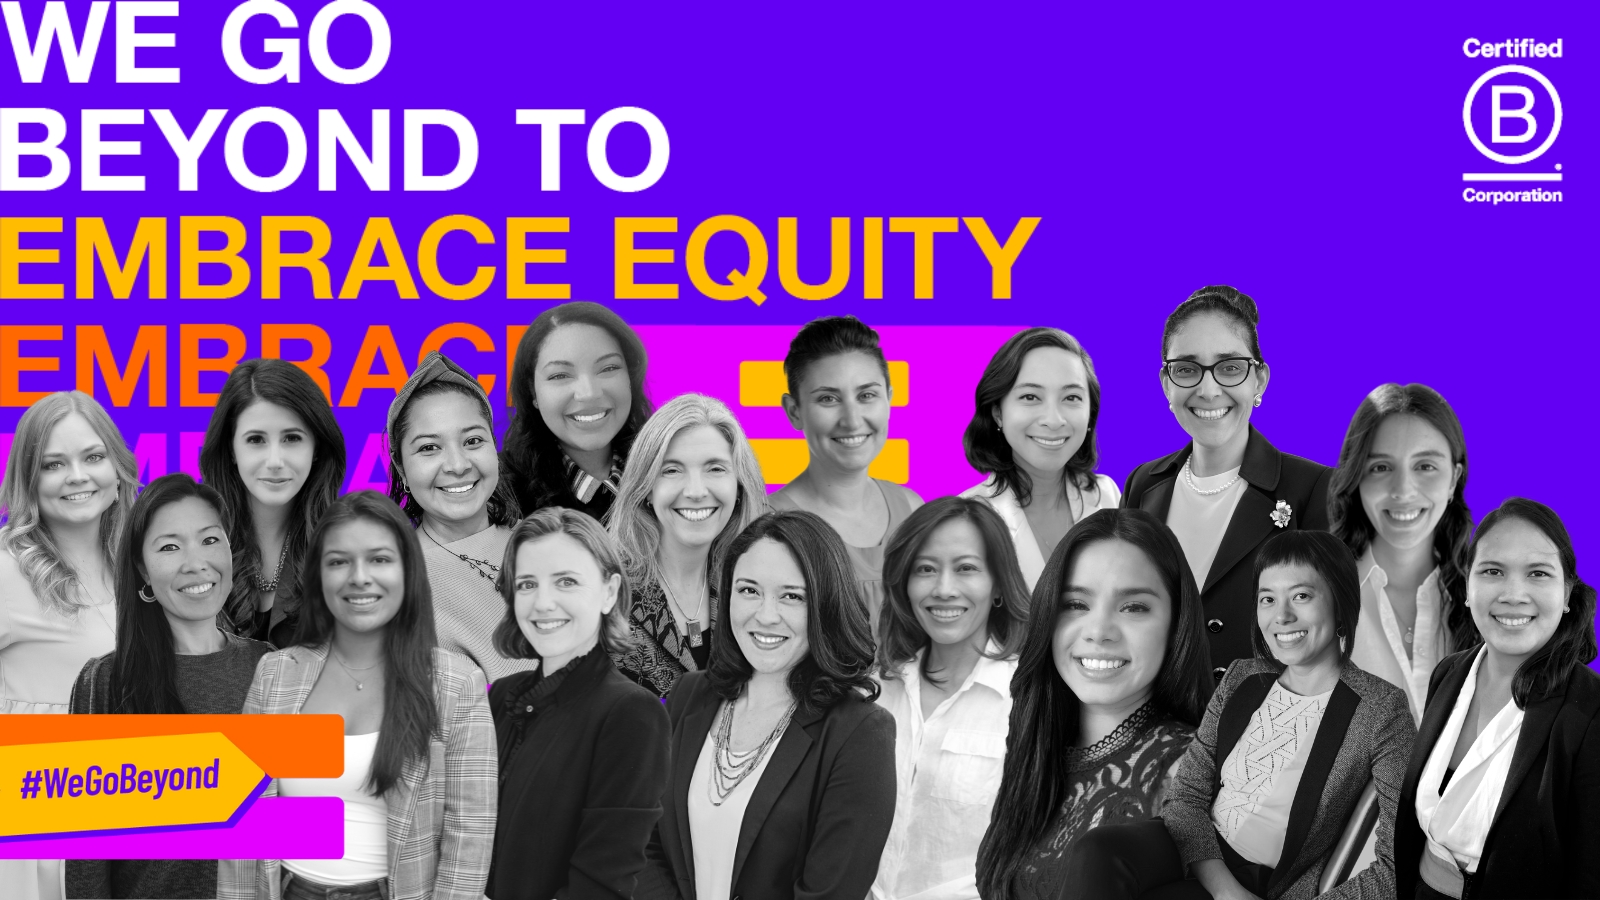 Women smiling into the camera with the text "We go beyond to embrace equity"